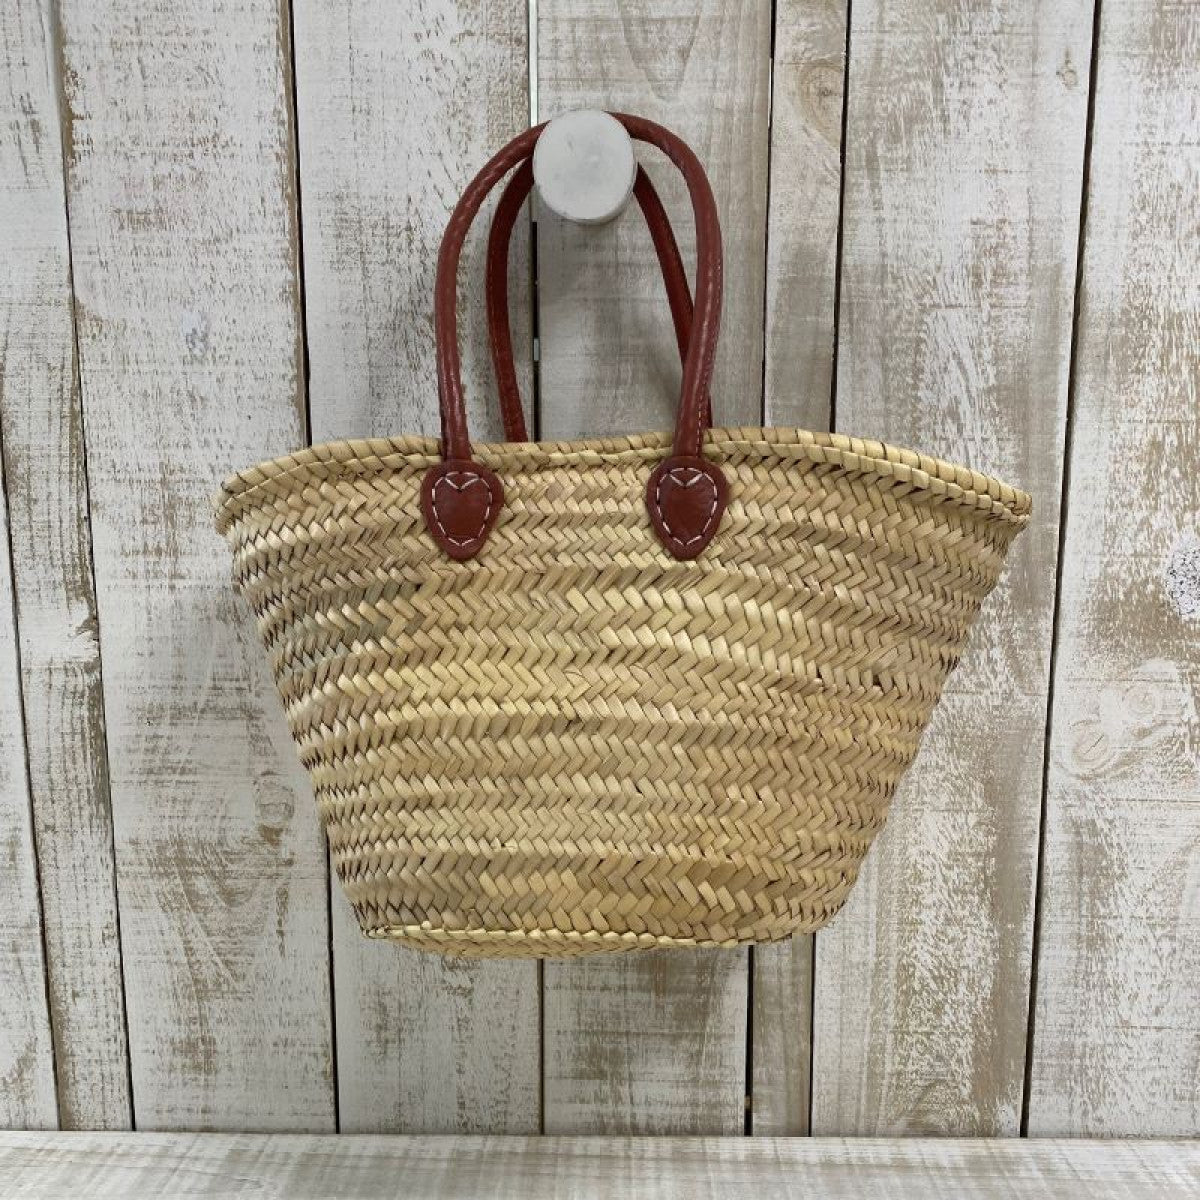 Woven Market Basket - Rustic Red